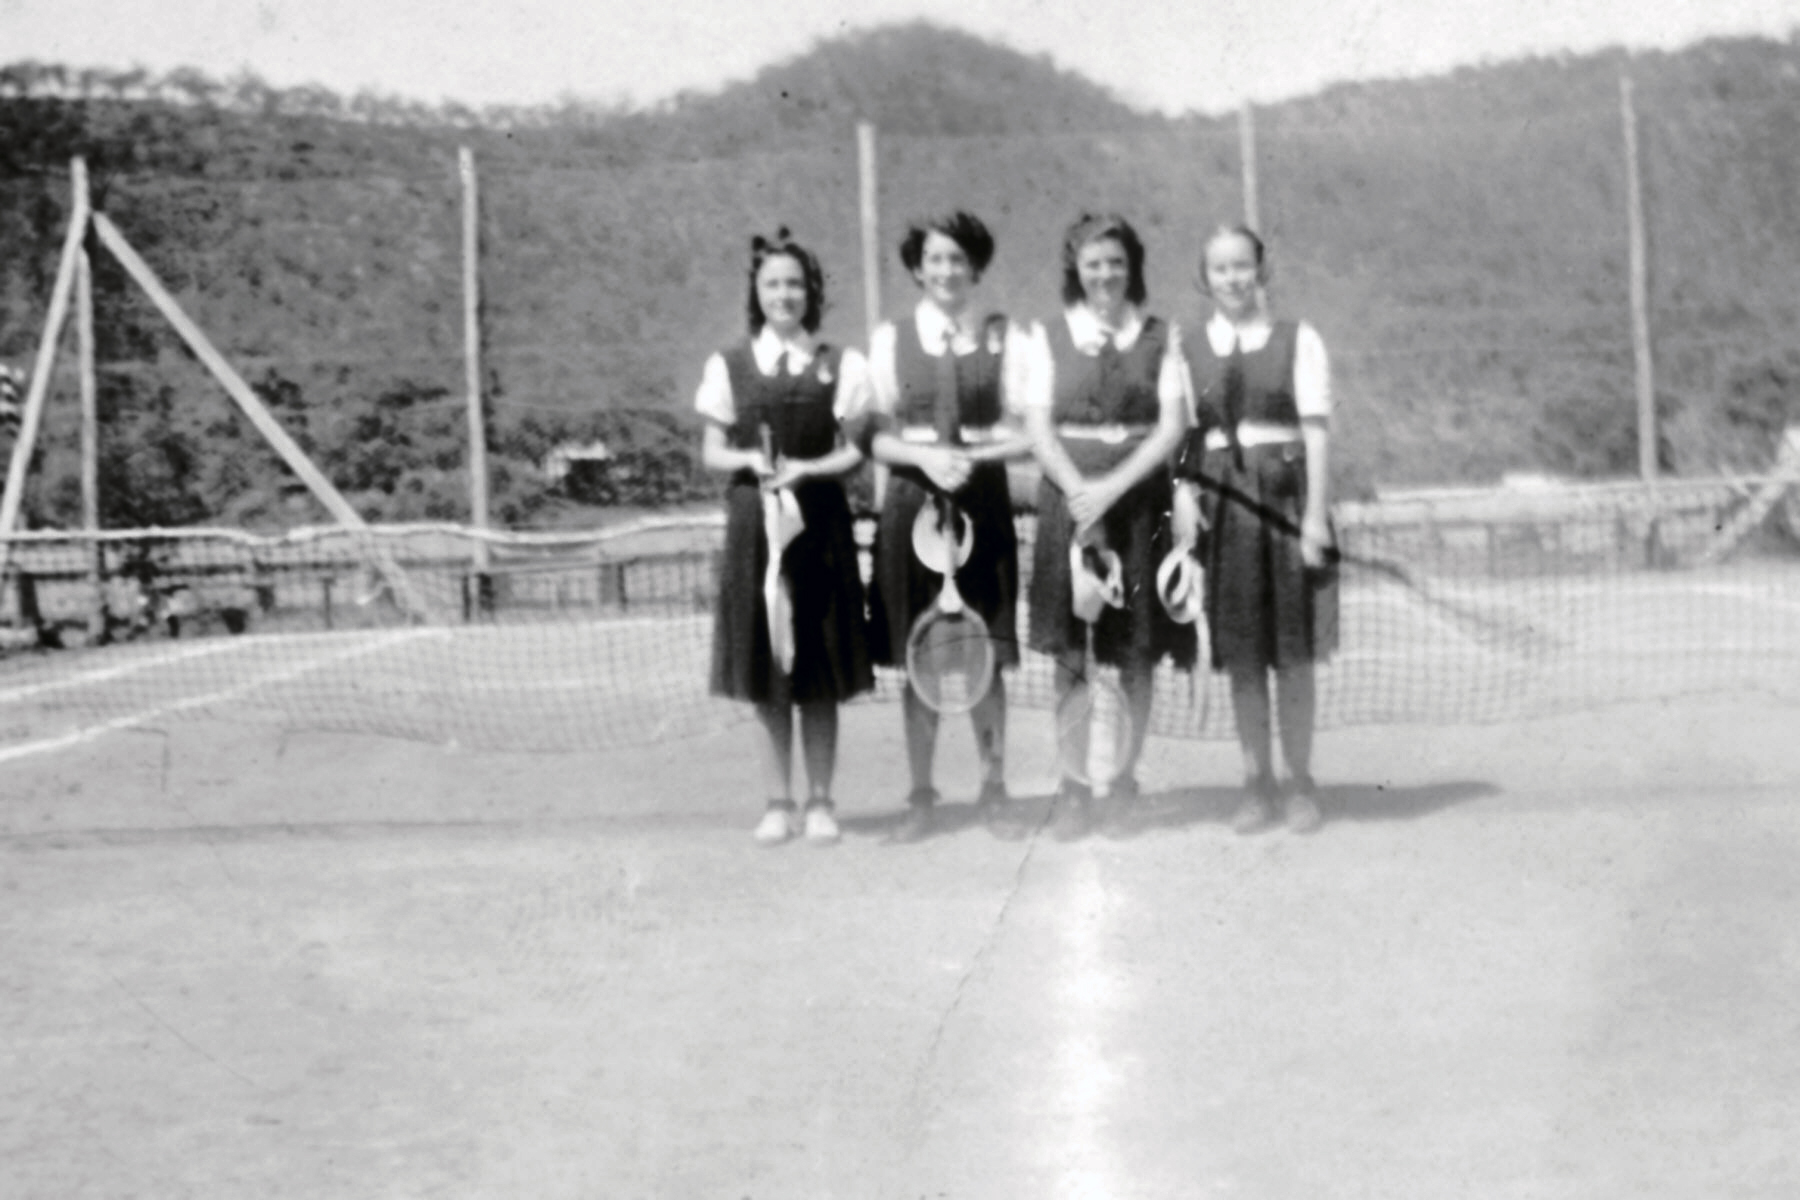 1946 Students on the tennis court